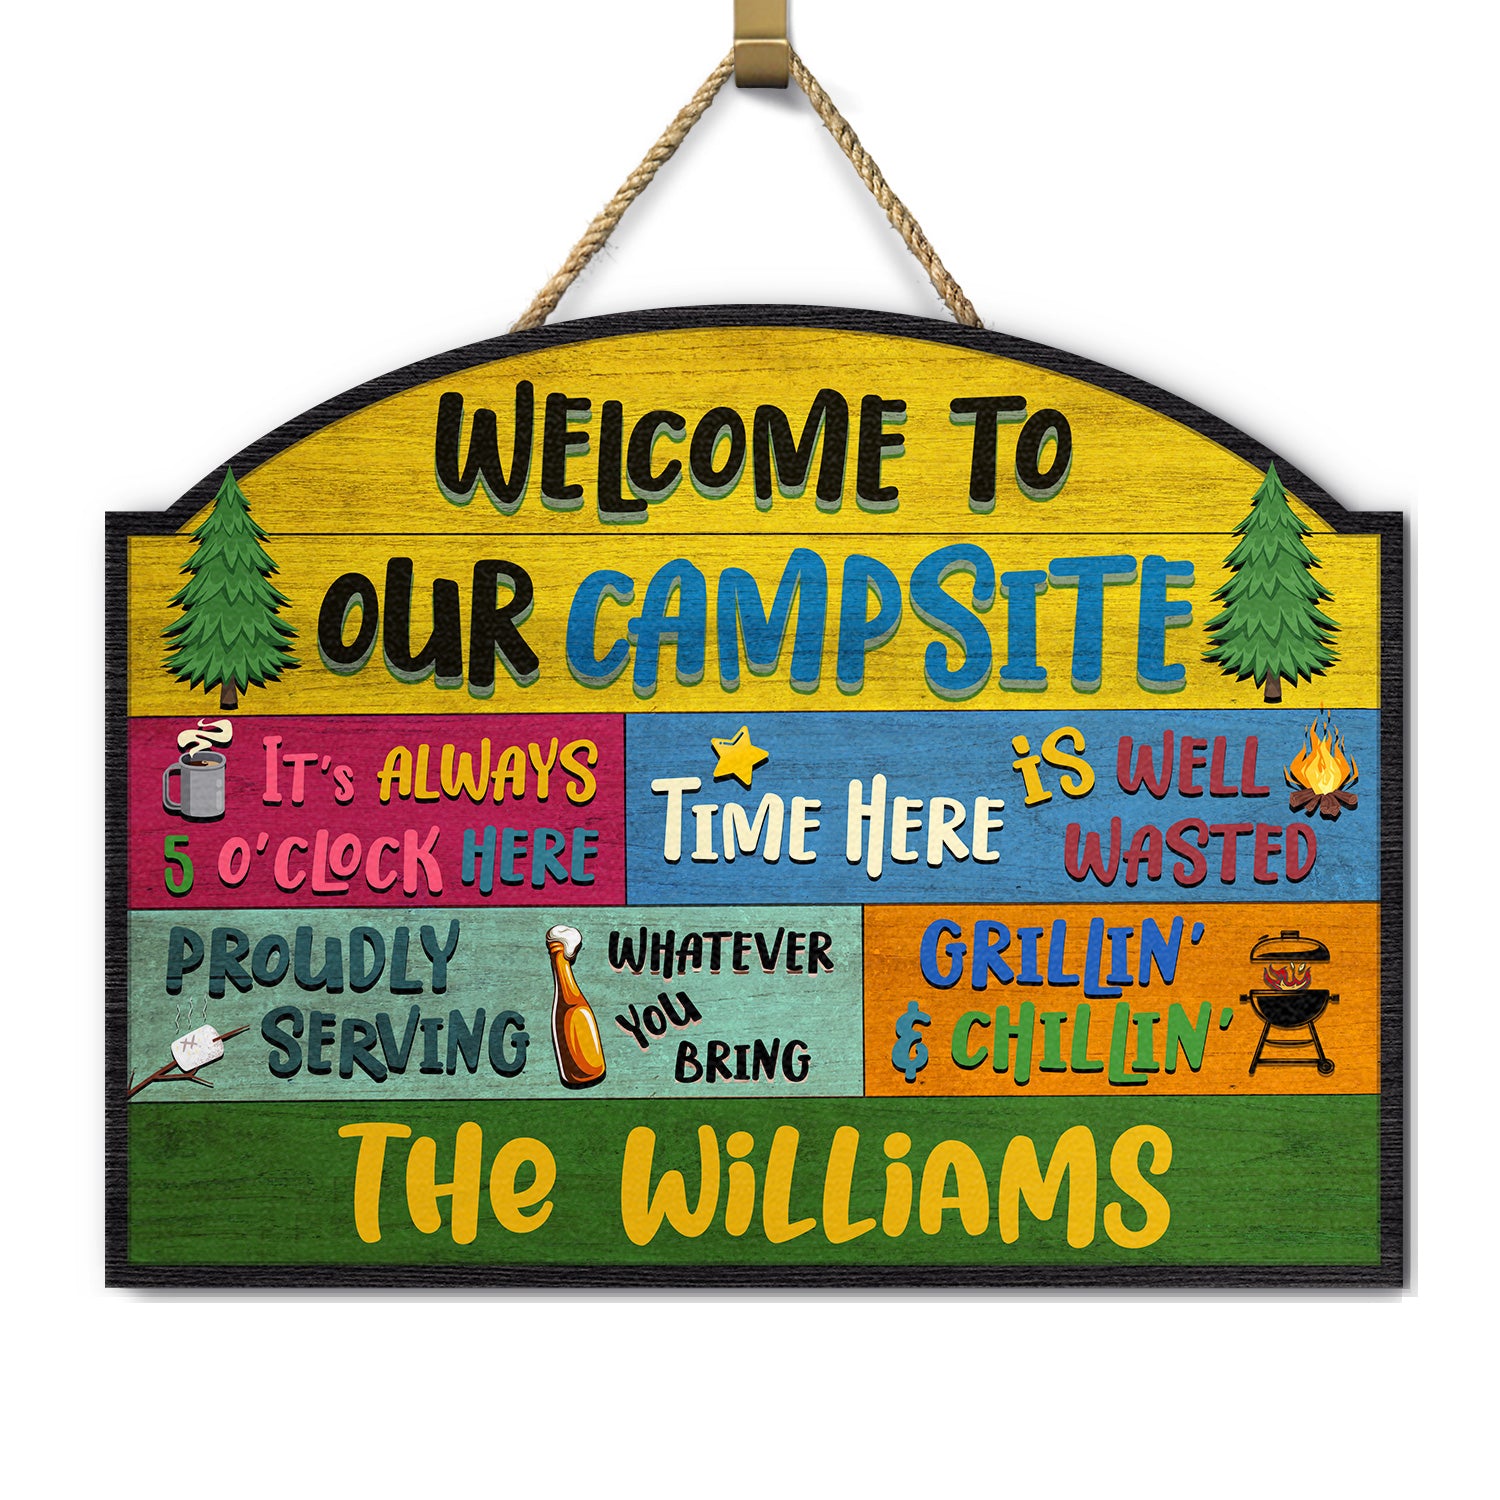 Welcome Grilling Chilling - Camping Decor - Personalized Custom Shaped Wood Sign